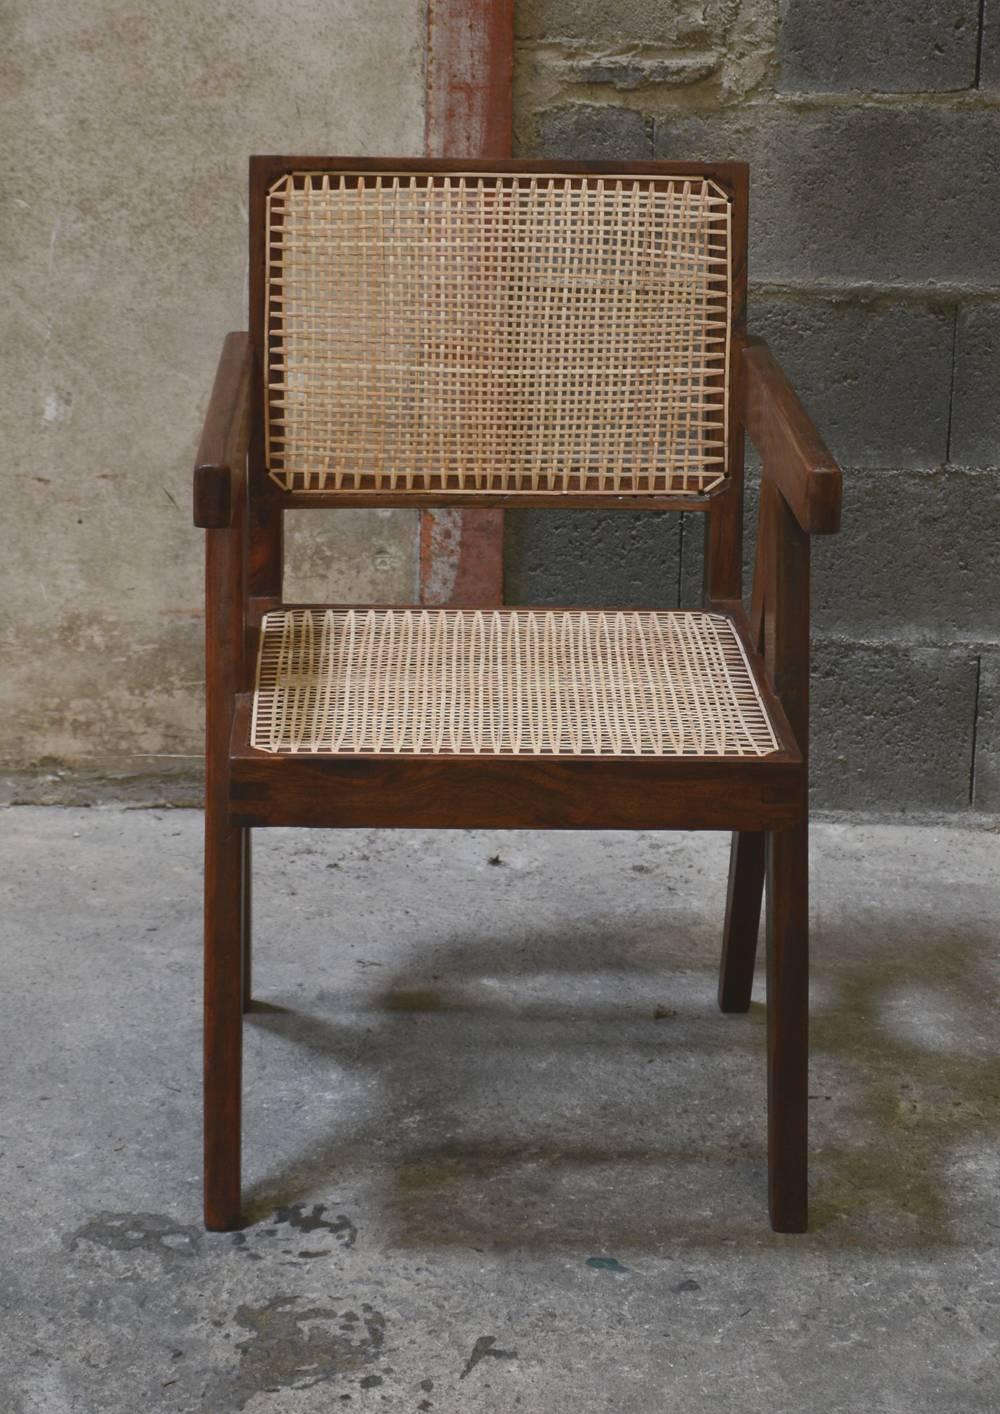 Pierre Jeanneret, cane and teak wood office armchair from administrative buildings in Chandigarh, India. Version with back jointed to the seat by large spindle pieces. Teak, woven cane and upholstered seat cushion featuring cloth covering. Photo